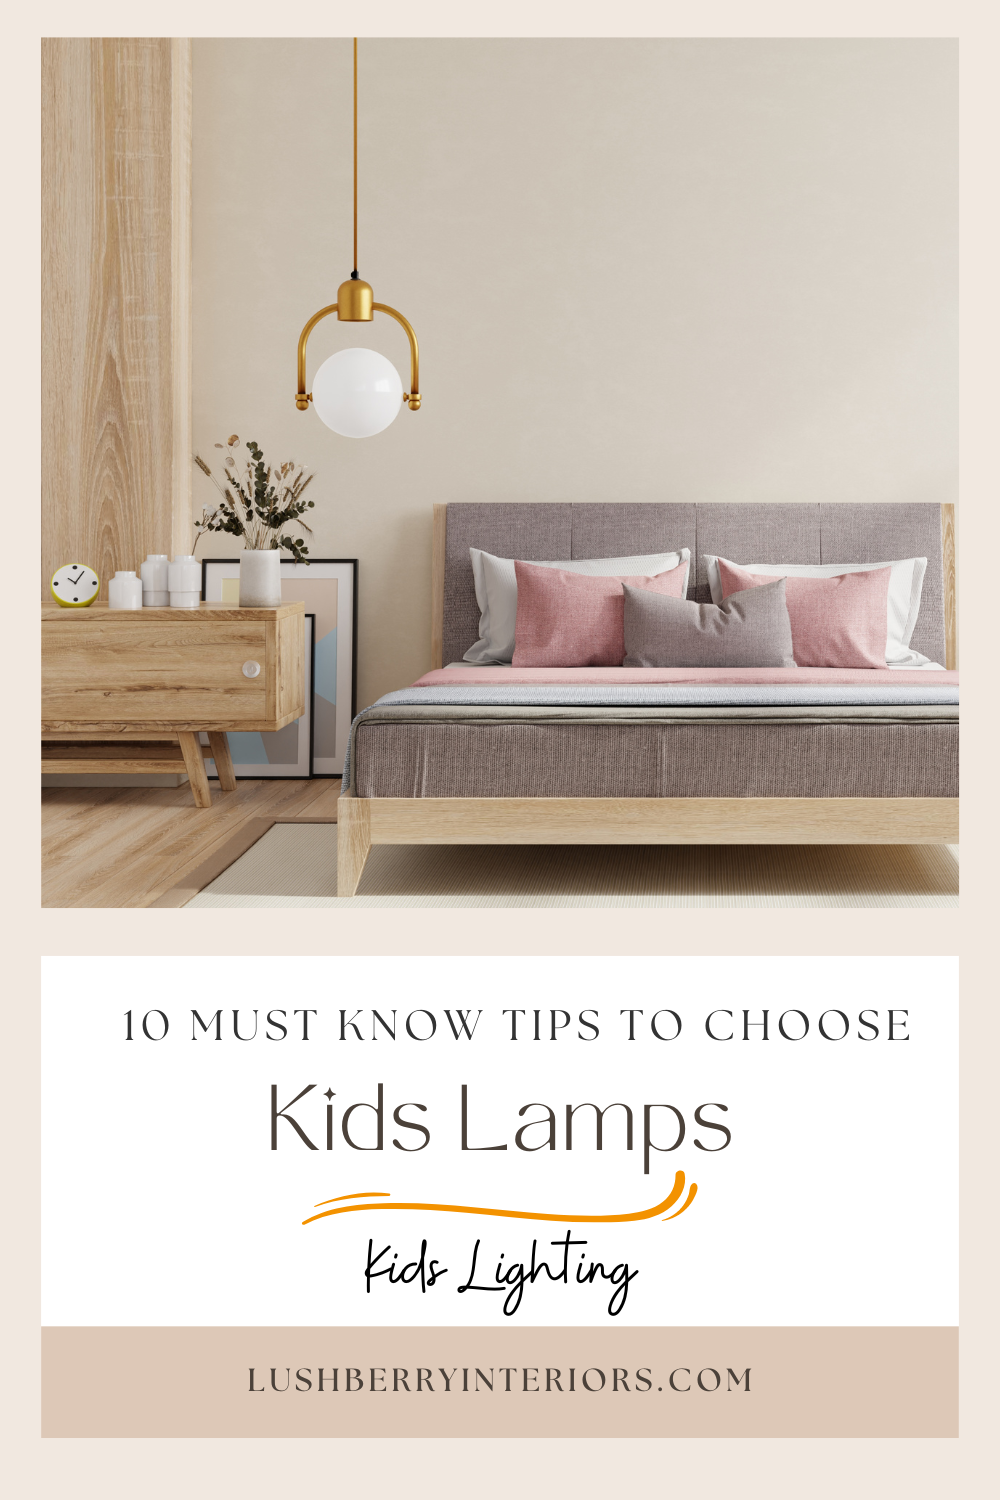 10 tips to choose kids lamps